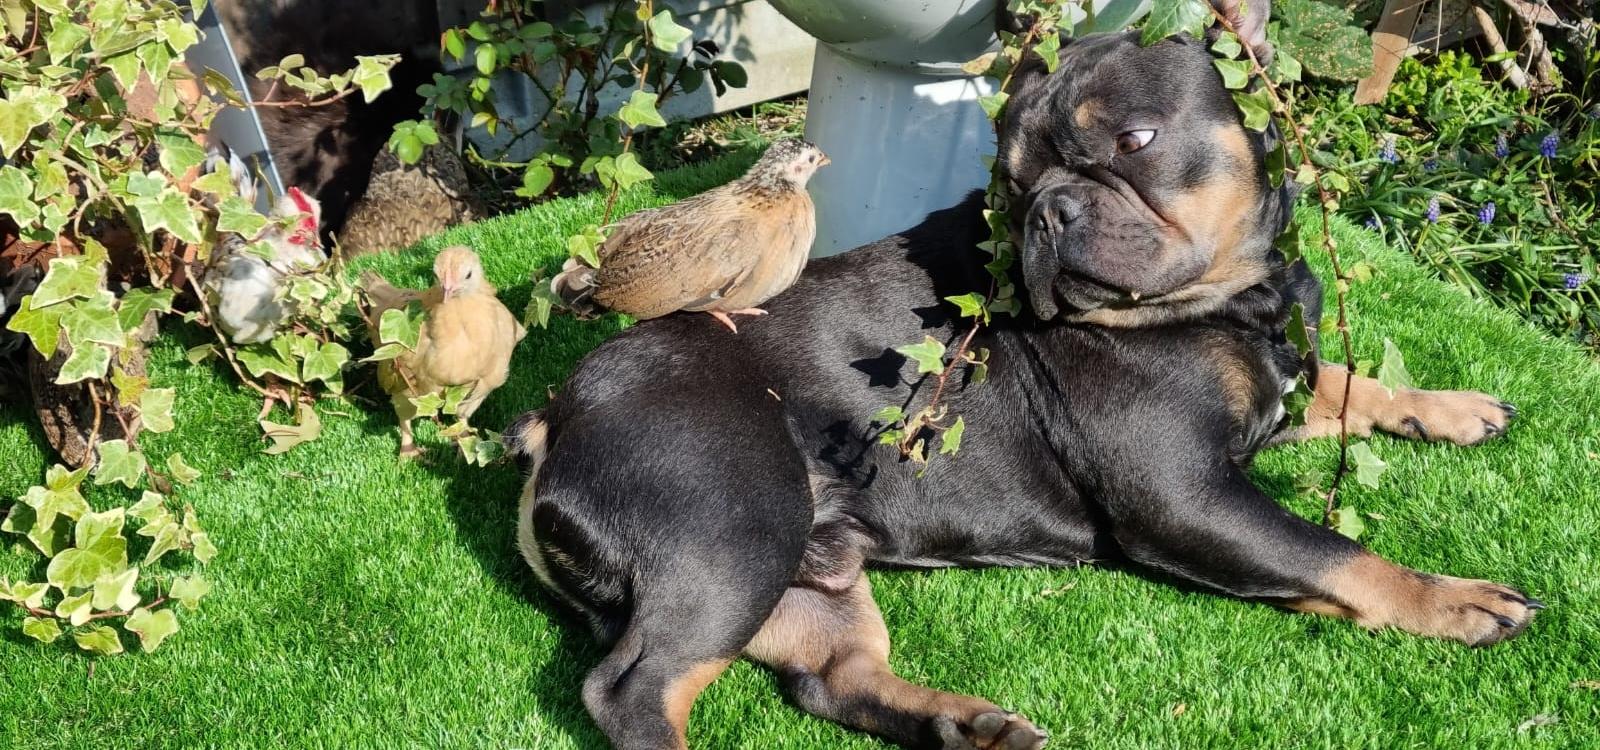 My dog lying with some chicks